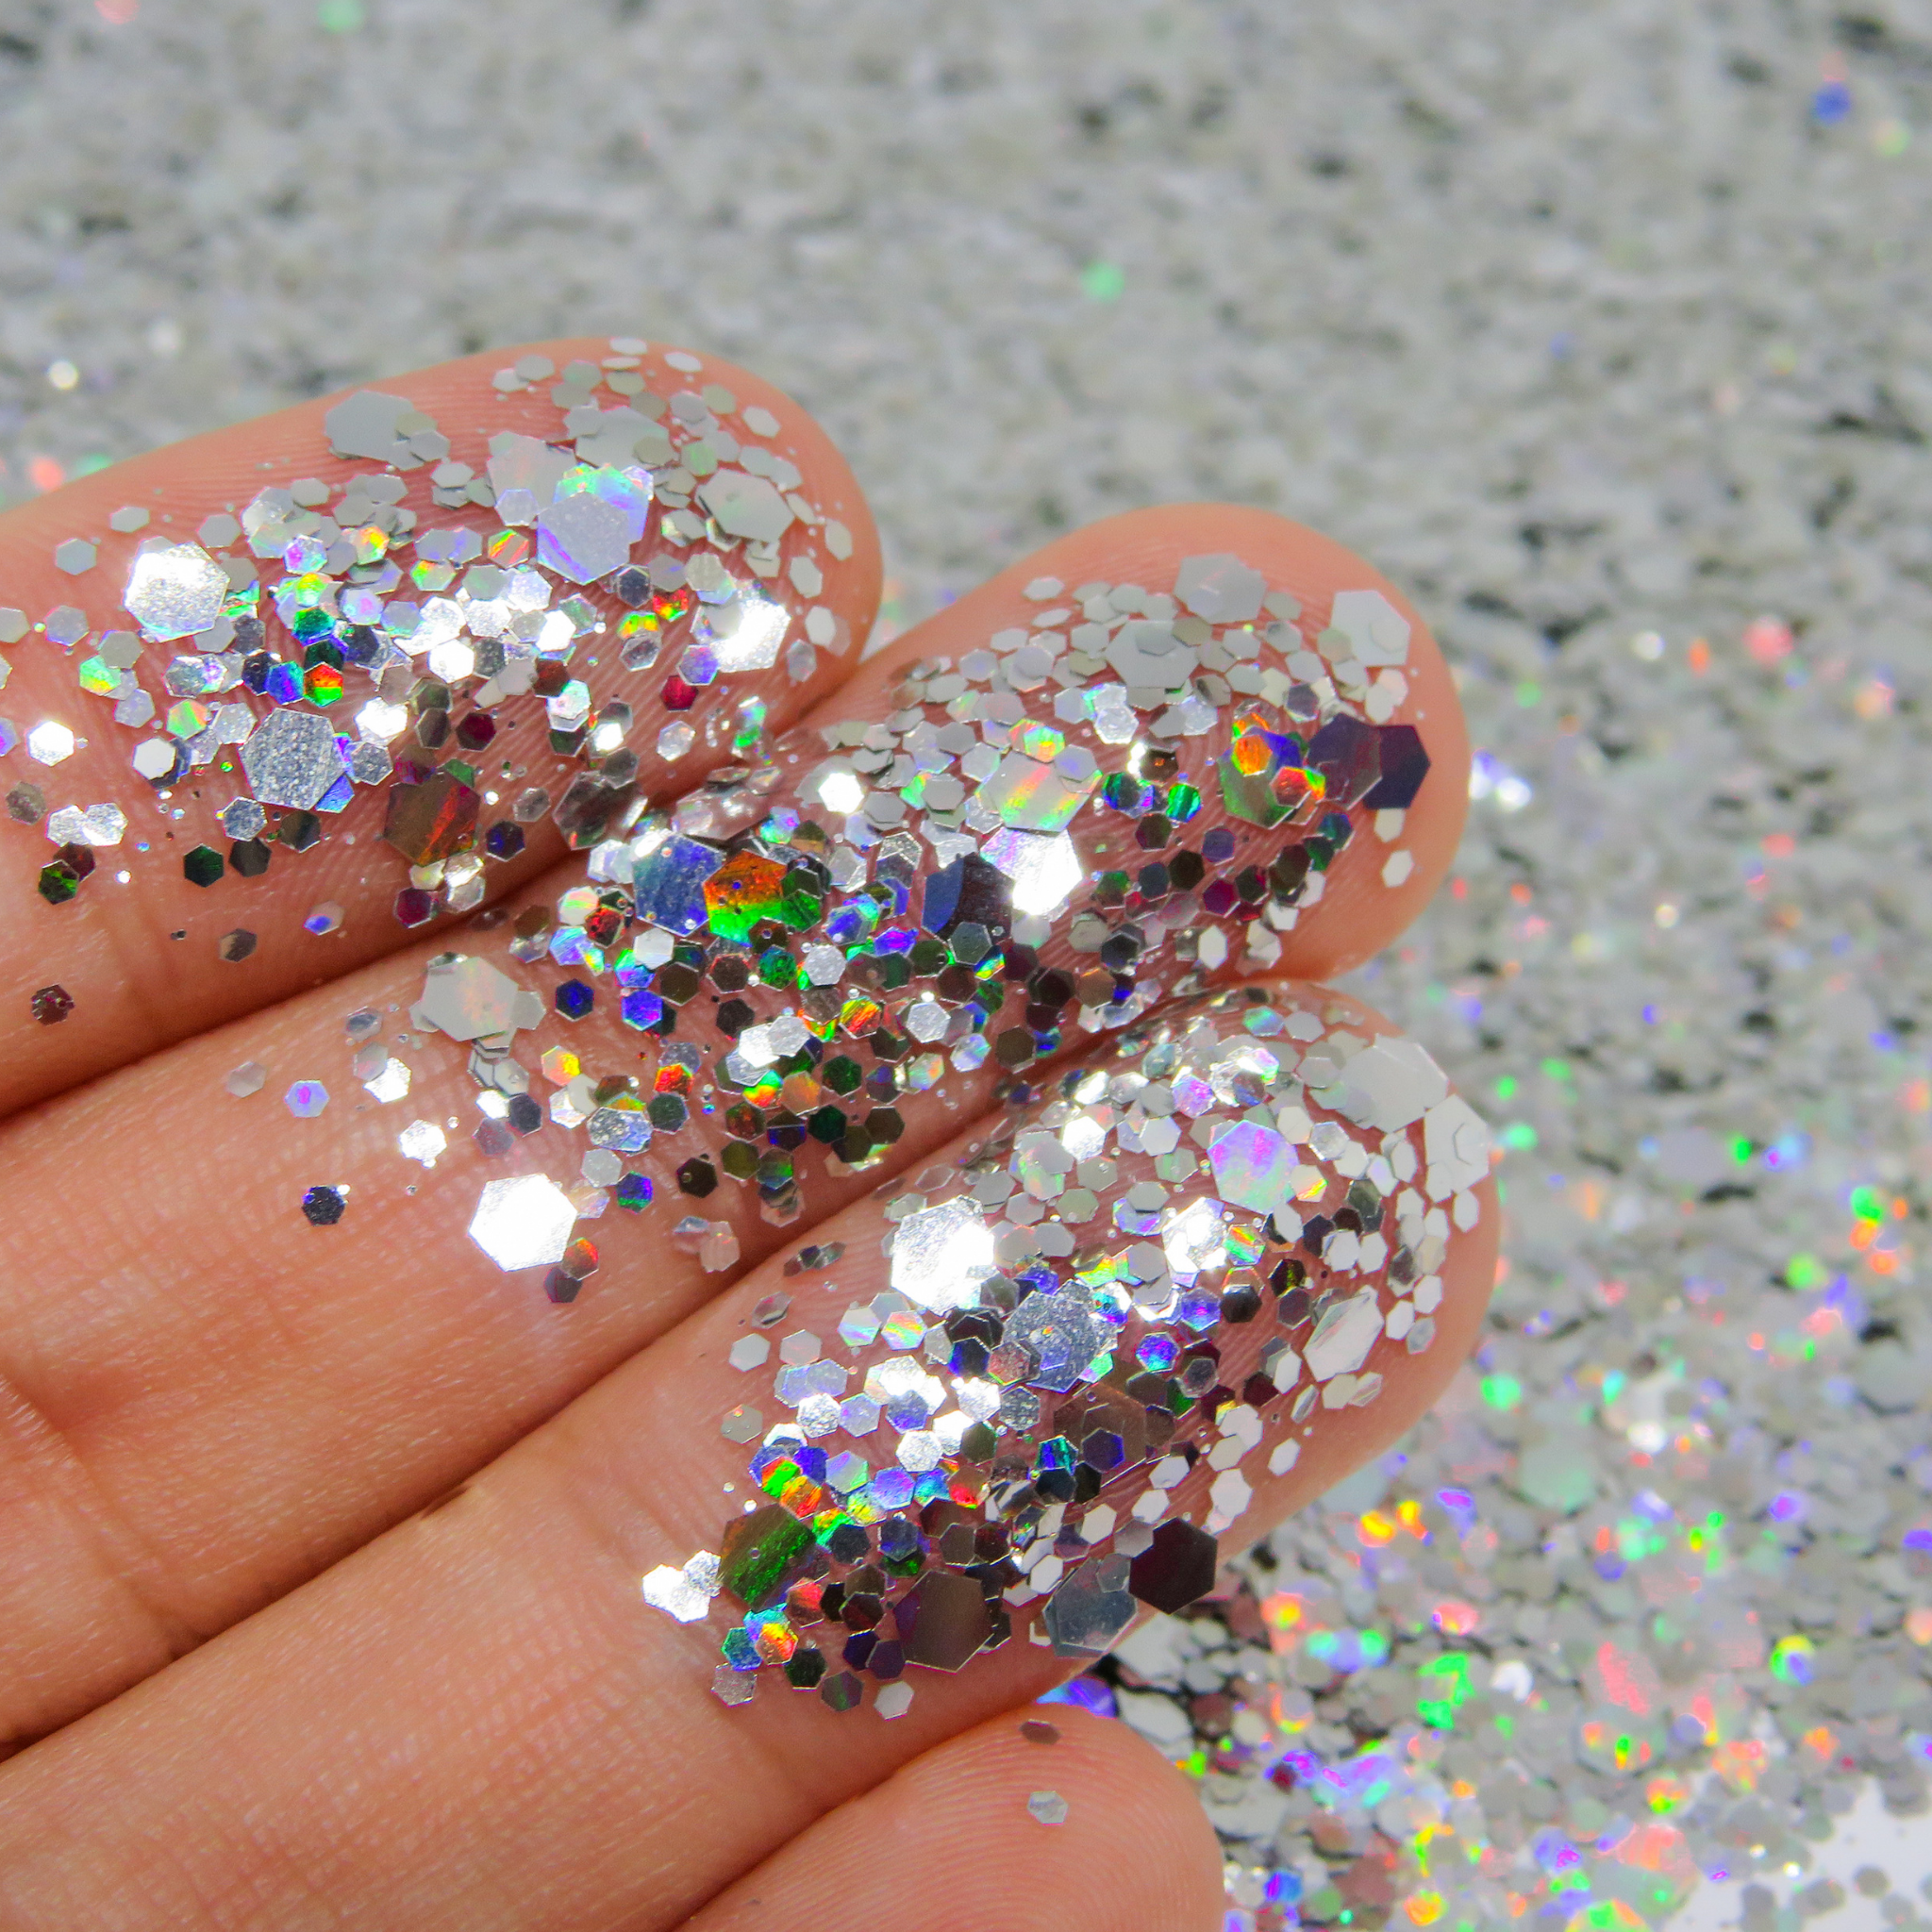 Holographic eco glitter blend